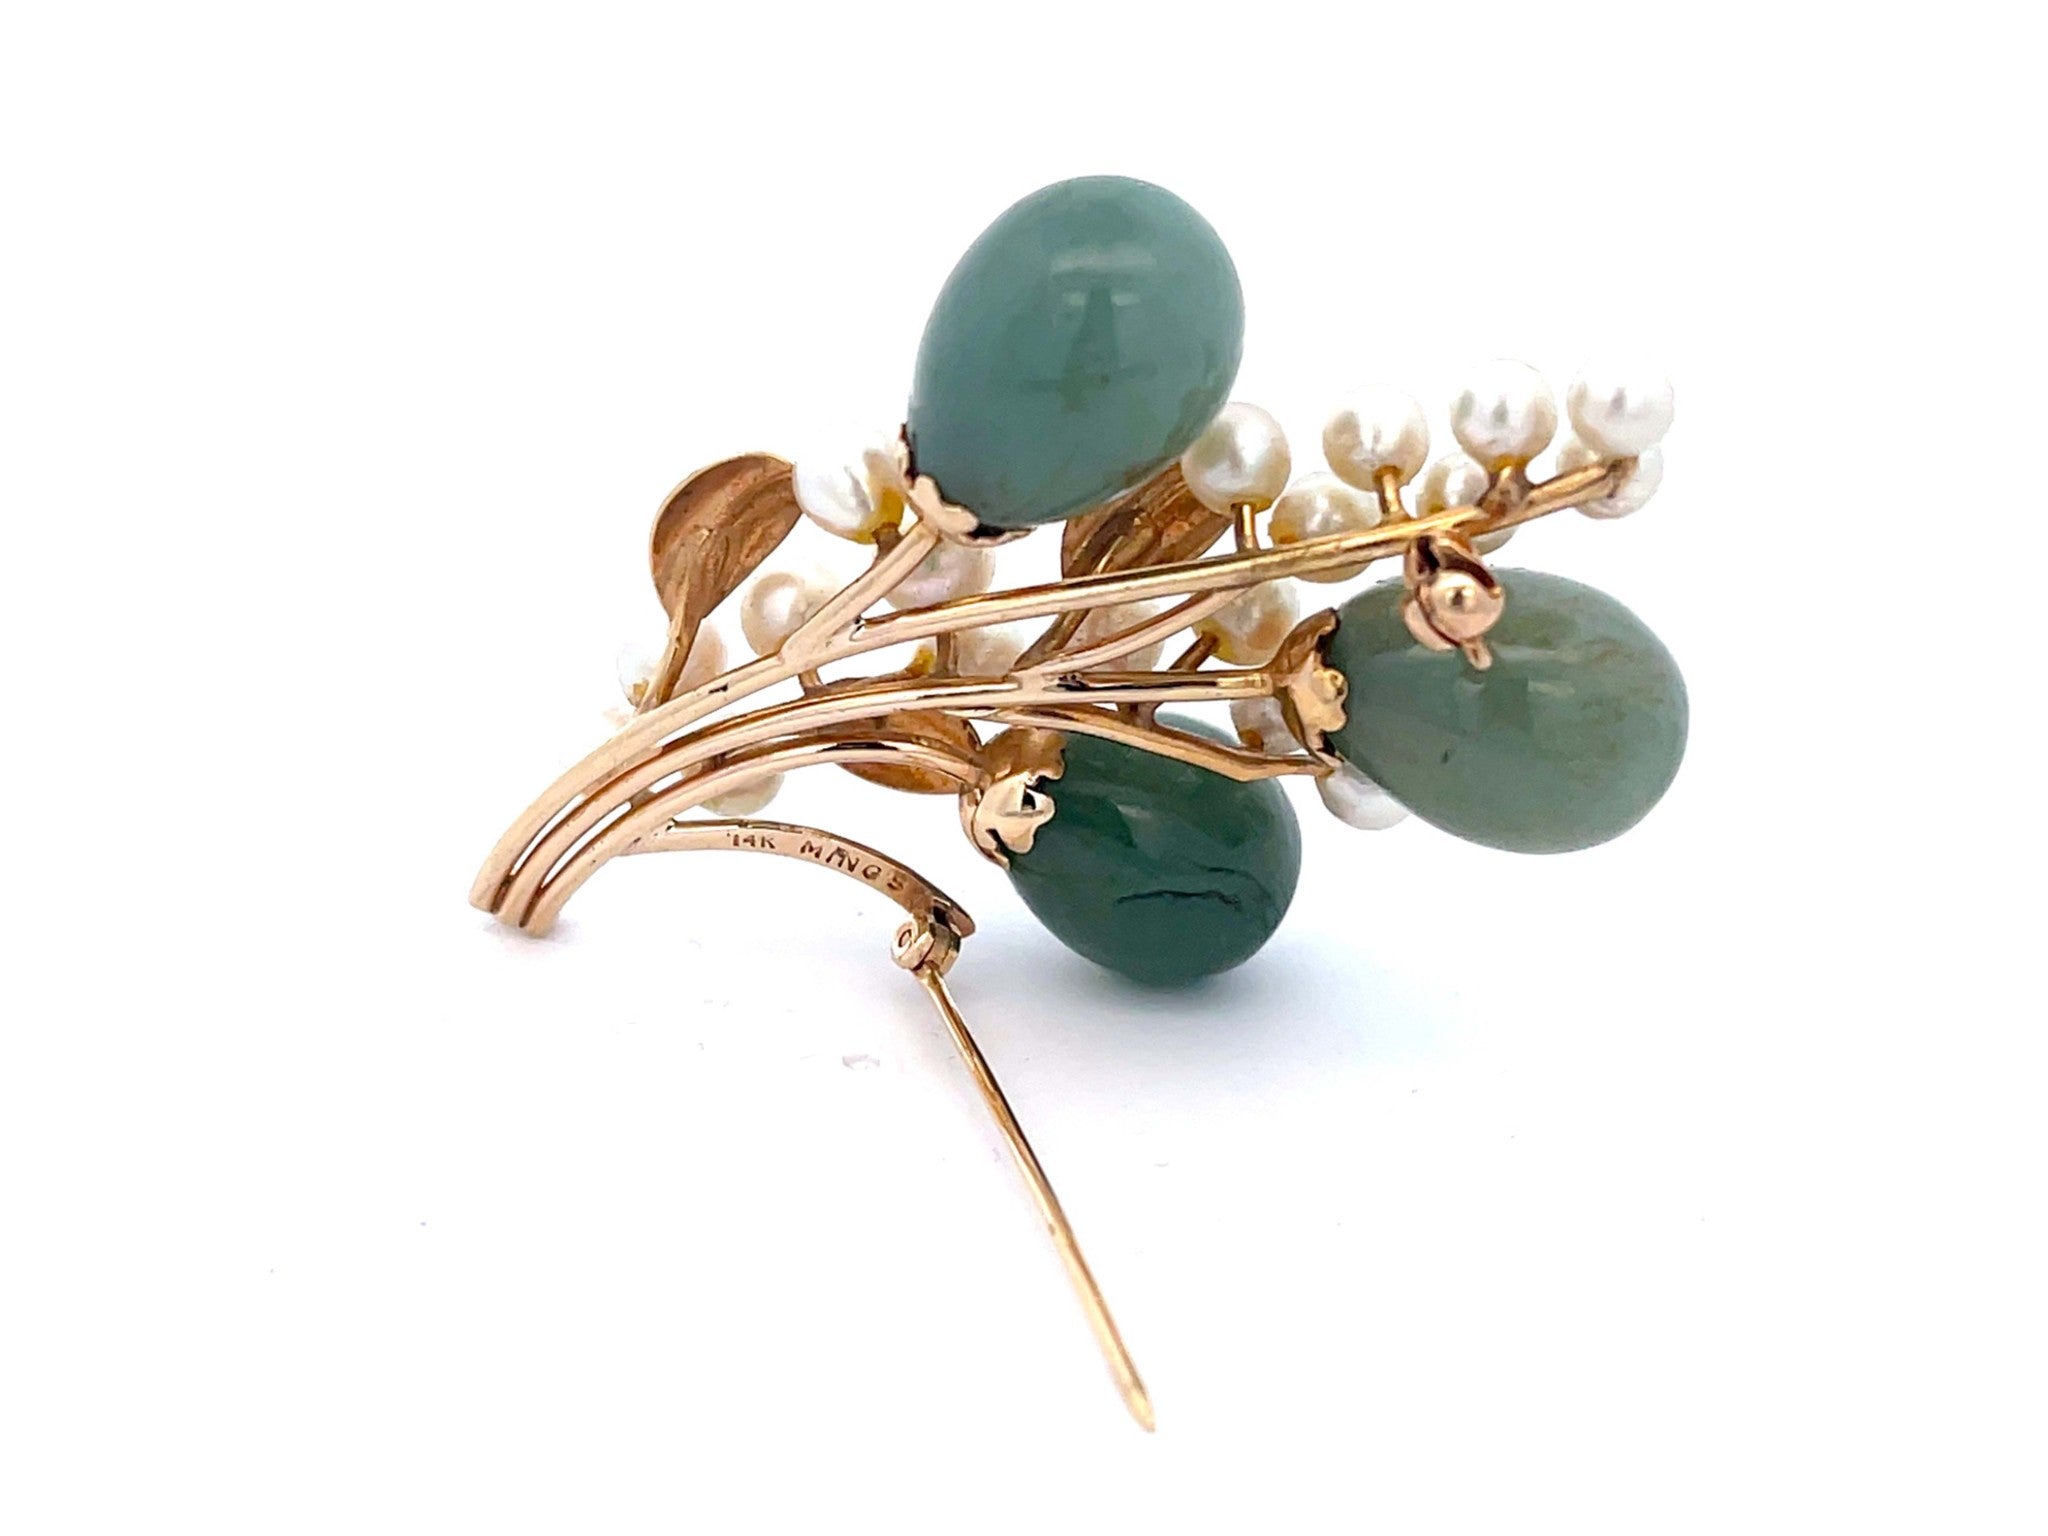 Mings Oval Jade Droplets Leaf and Pearl Brooch in 14k Yellow Gold